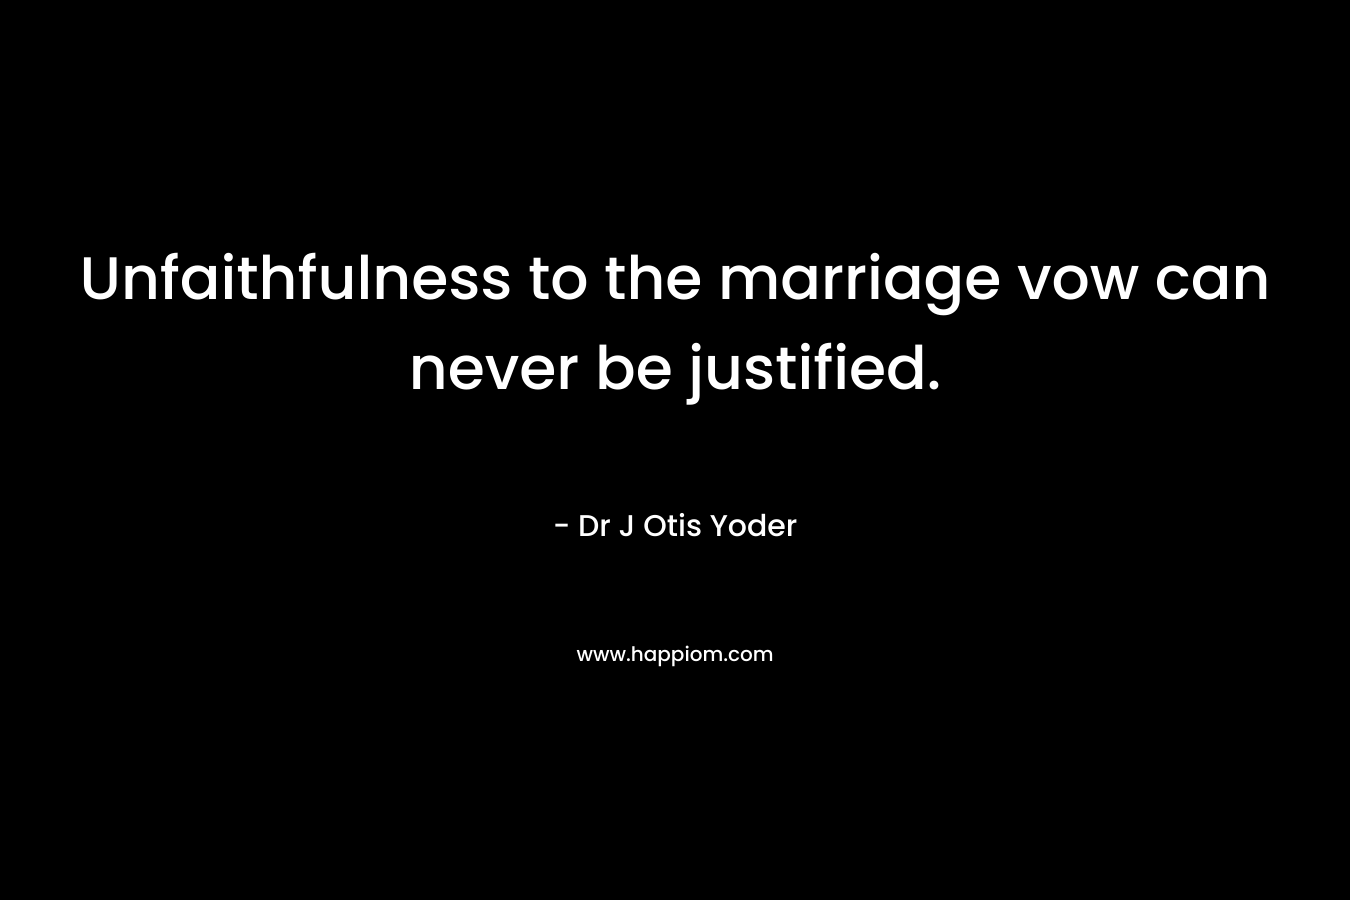 Unfaithfulness to the marriage vow can never be justified.